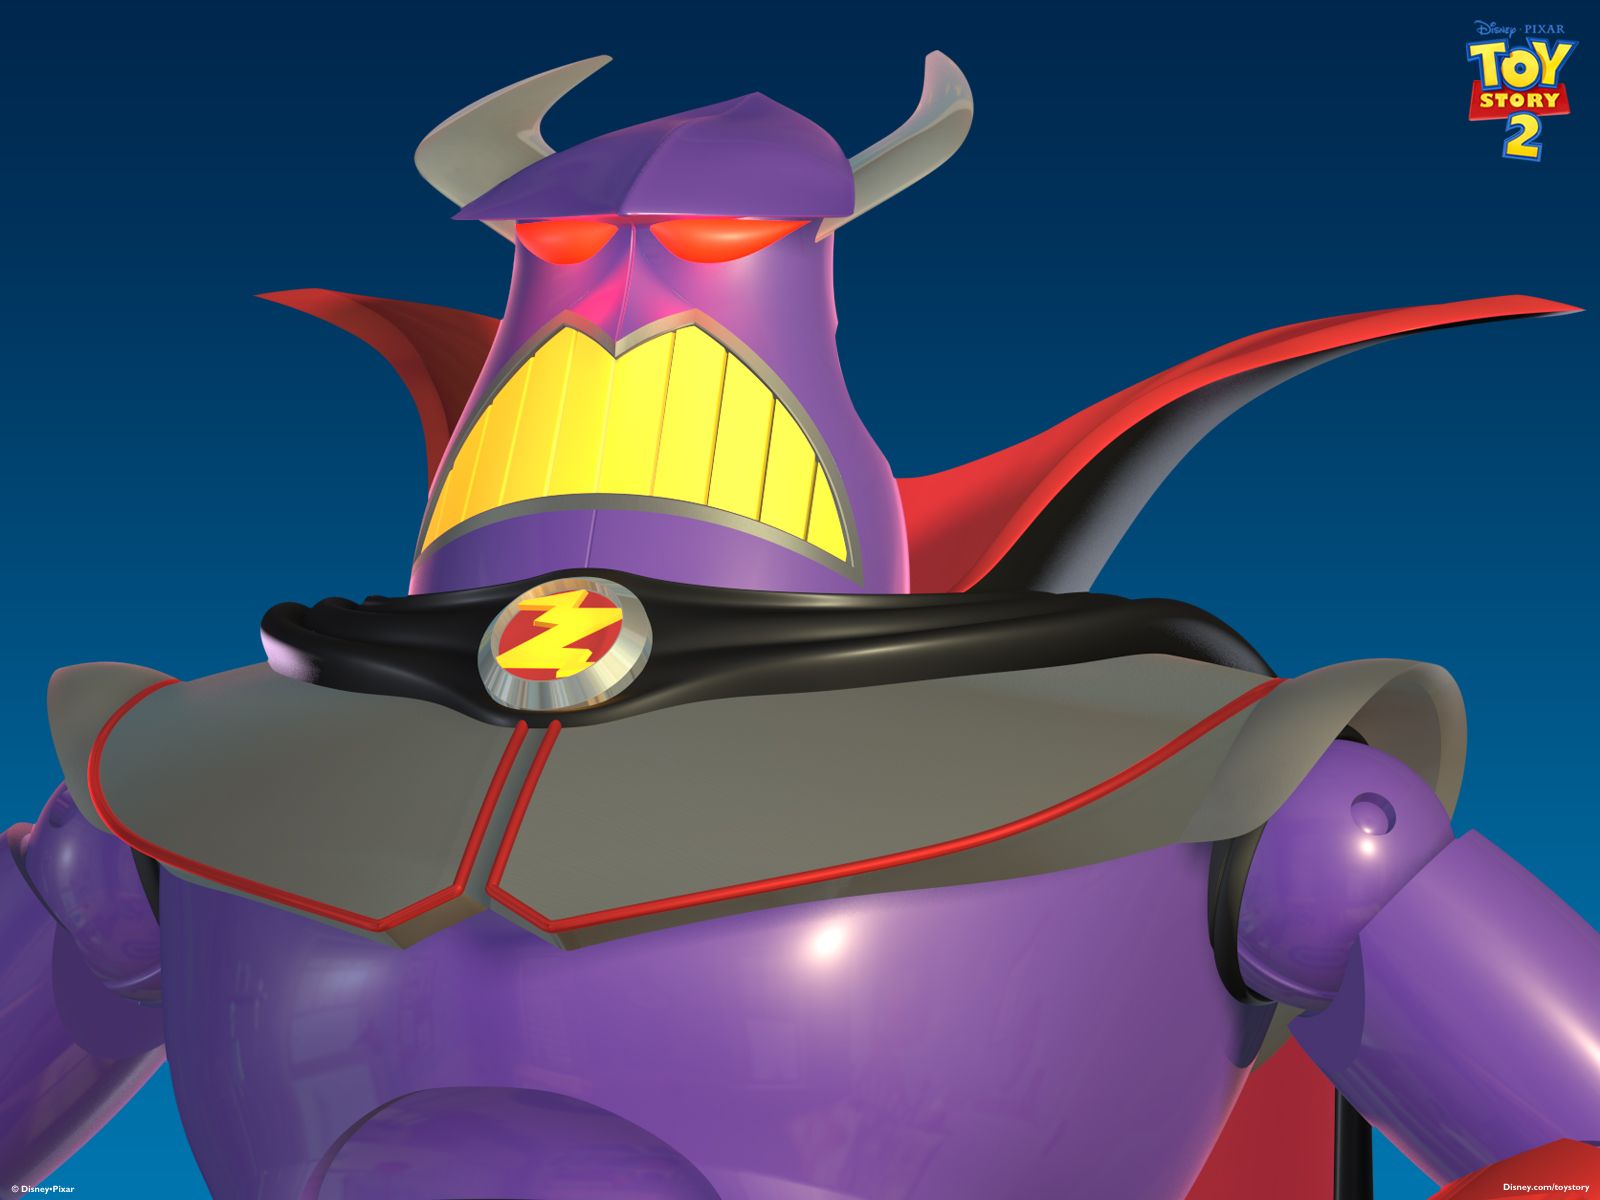 Emperor Zurg. Toy story characters, Toy story, Toy story 1995